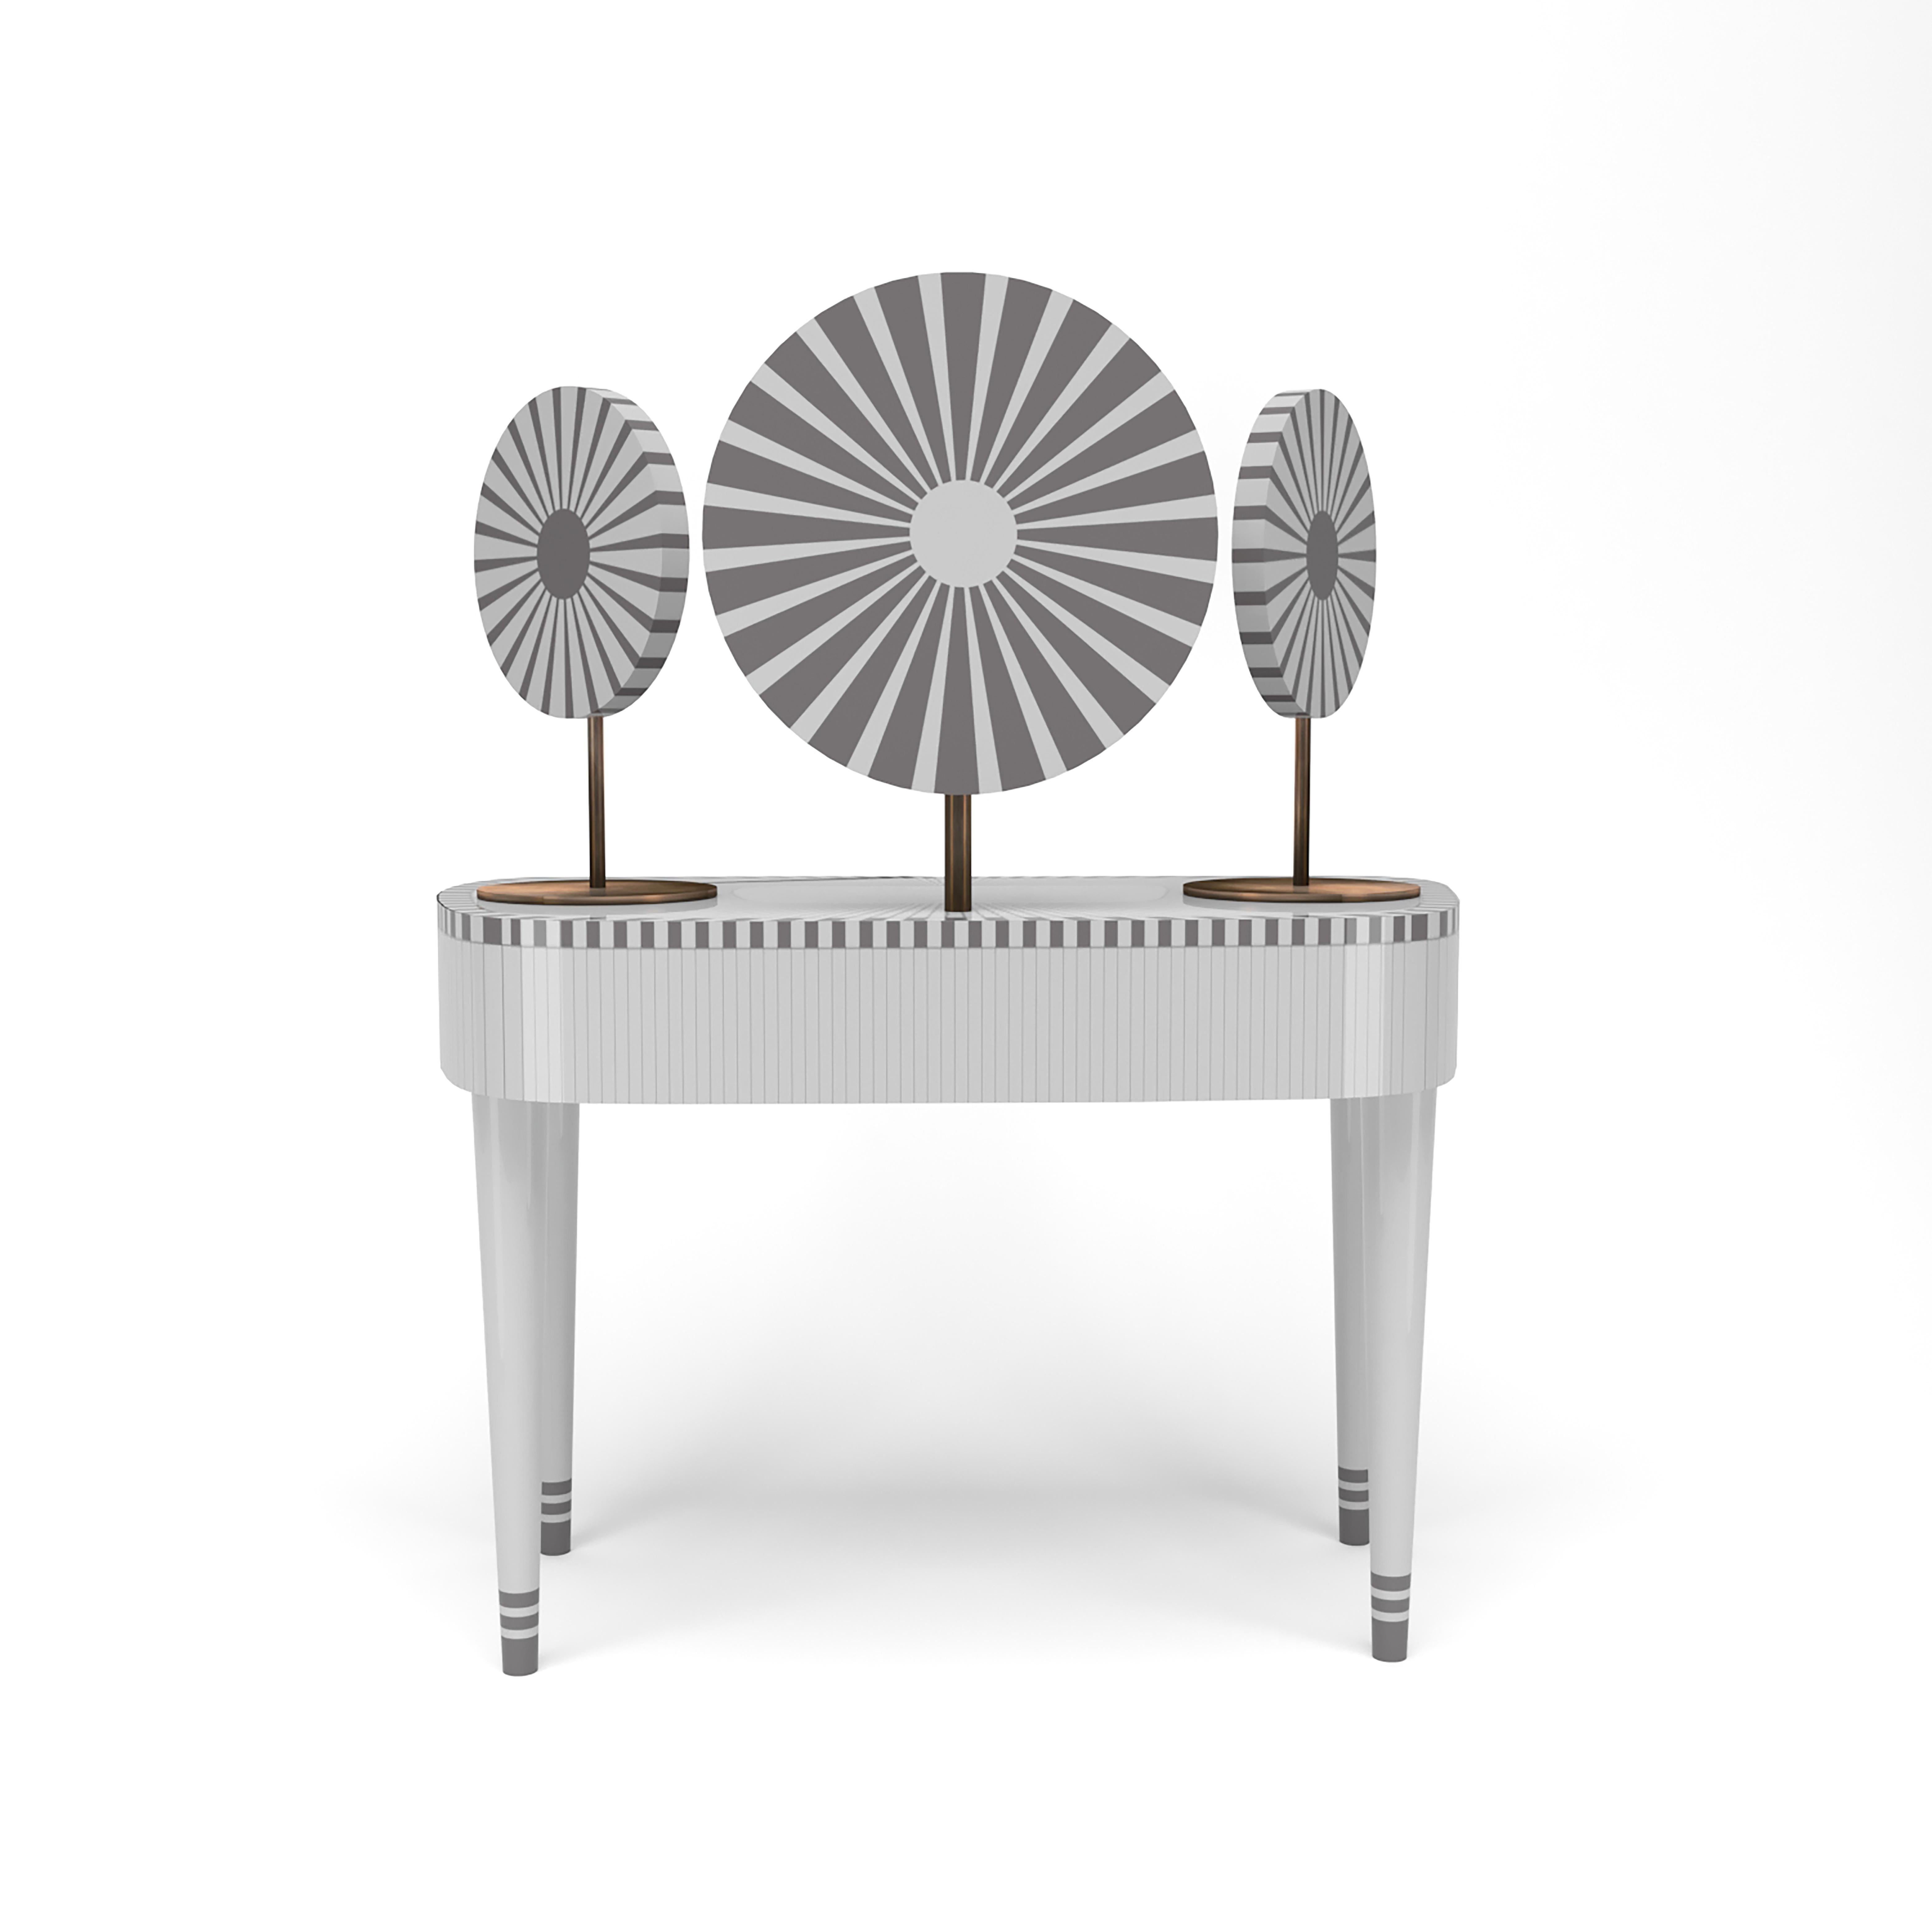 Woman in Paris White and Gray Vanity Table by Matteo Cibic is a stunning dressing table with two drawers and three mirrors, two of which can be moved to desired angles. It is available in a range of colors, which can be customised according to the